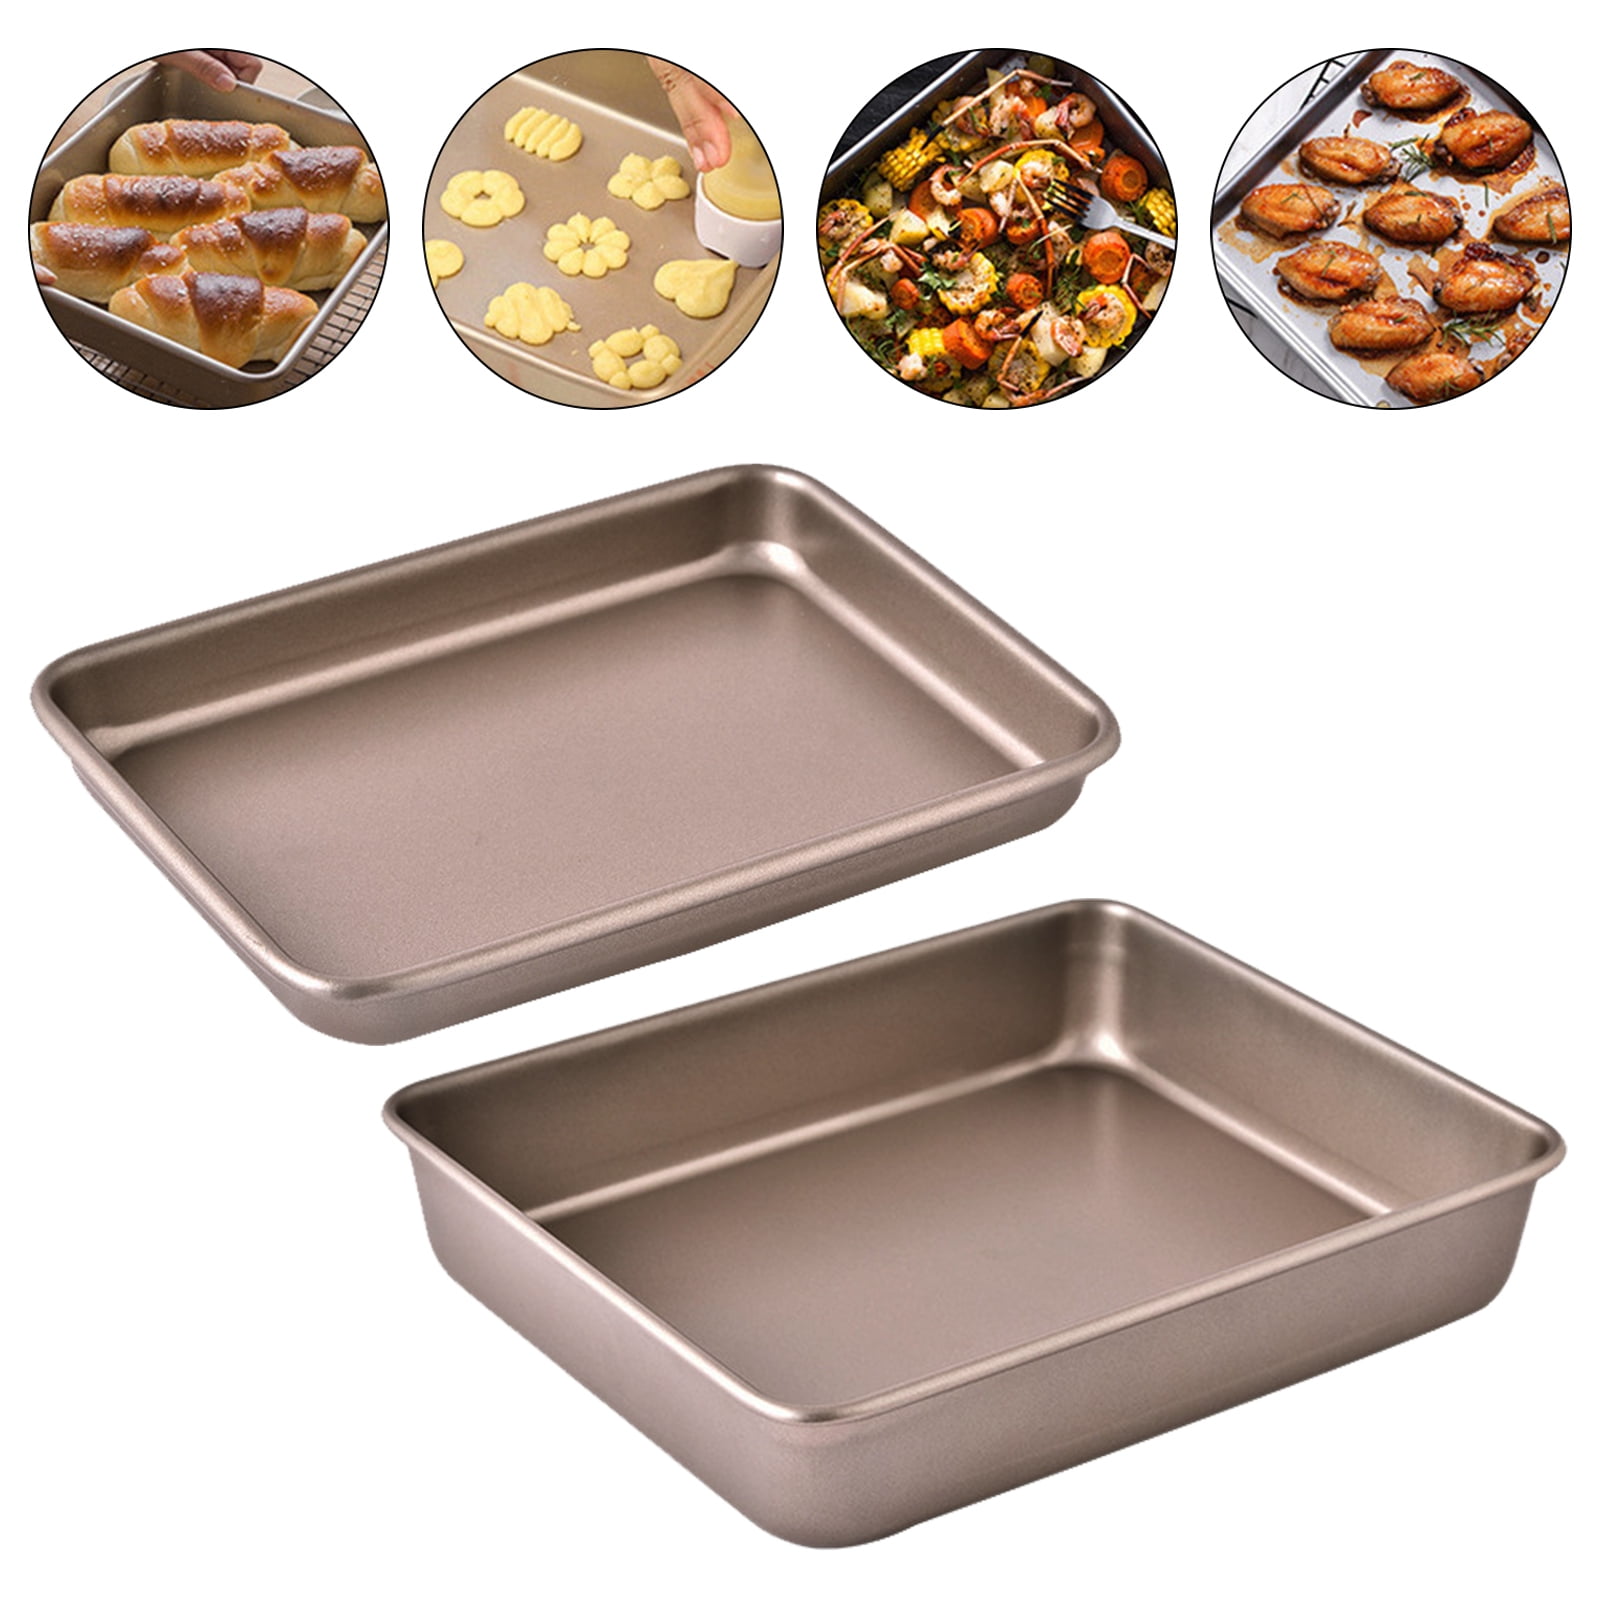 HYTK Small Cookie Cake Brownie Baking Sheet Pan Set 11 X 9 Inch Toaster  Oven Replacement Tray Bakeware Nonstick 2X Thicken High Carbon Steel BPA  Free